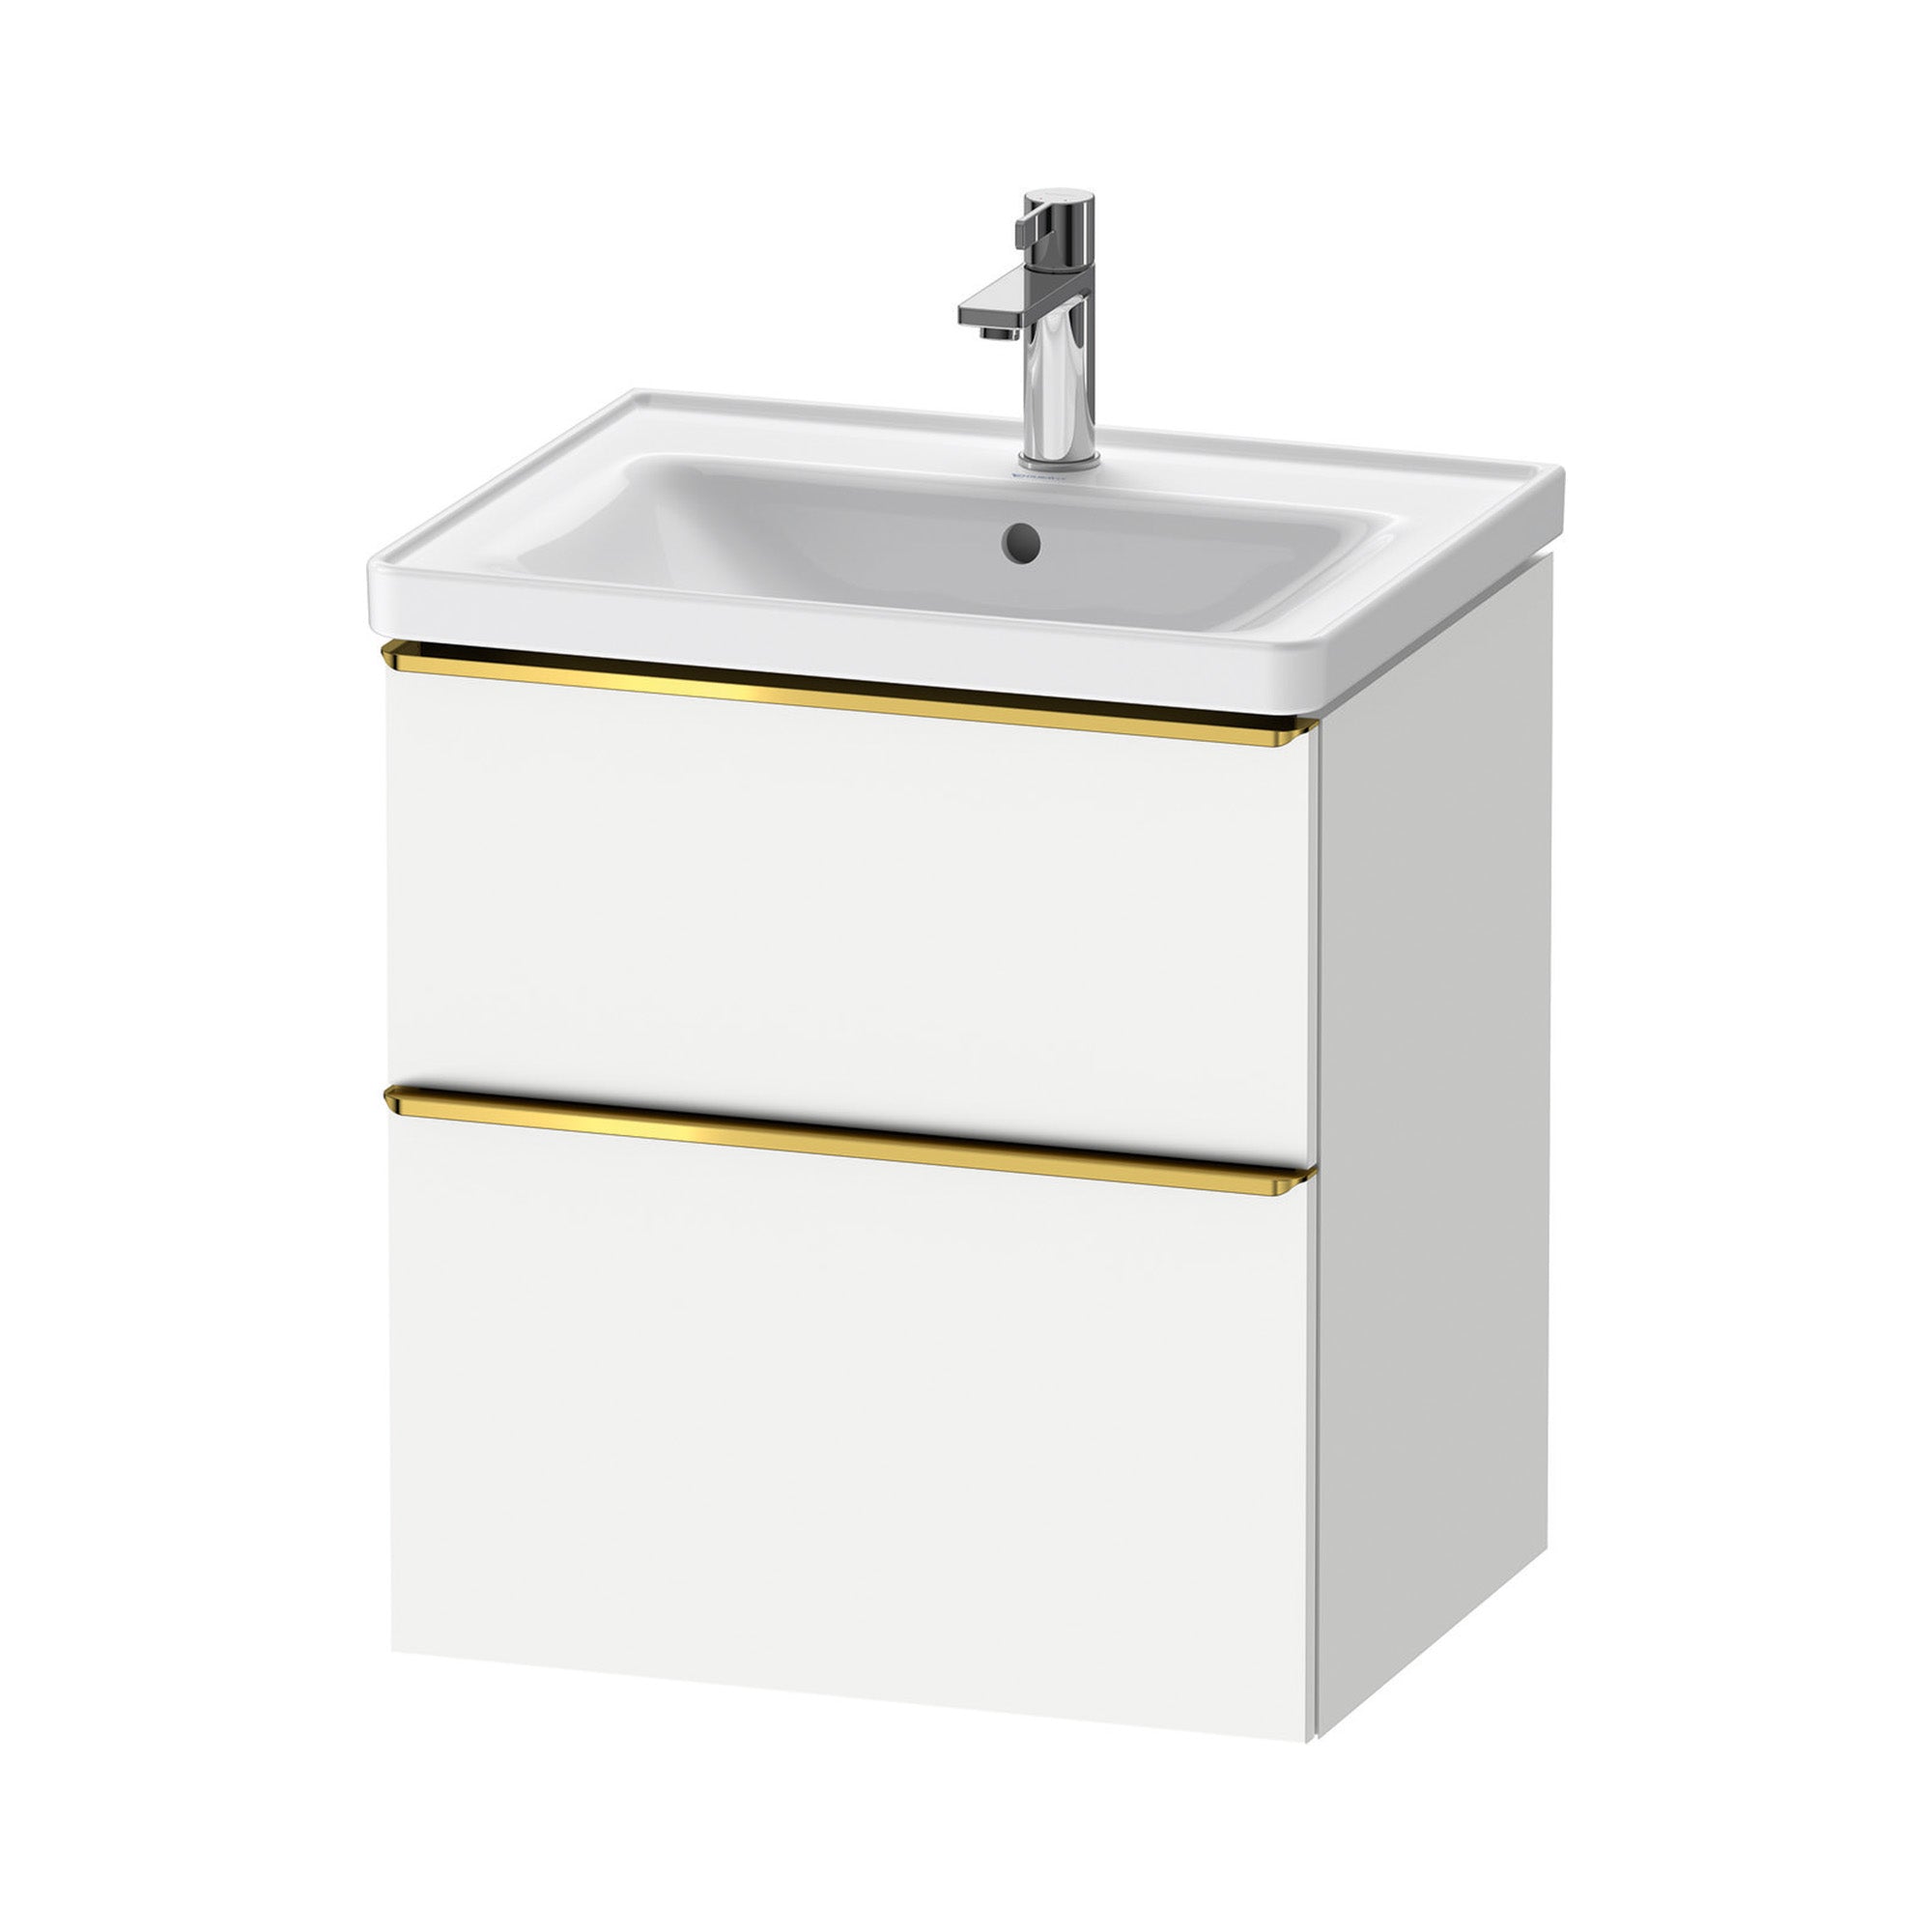 duravit d-neo 600 wall mounted vanity unit with d-neo basin matt white gold handles